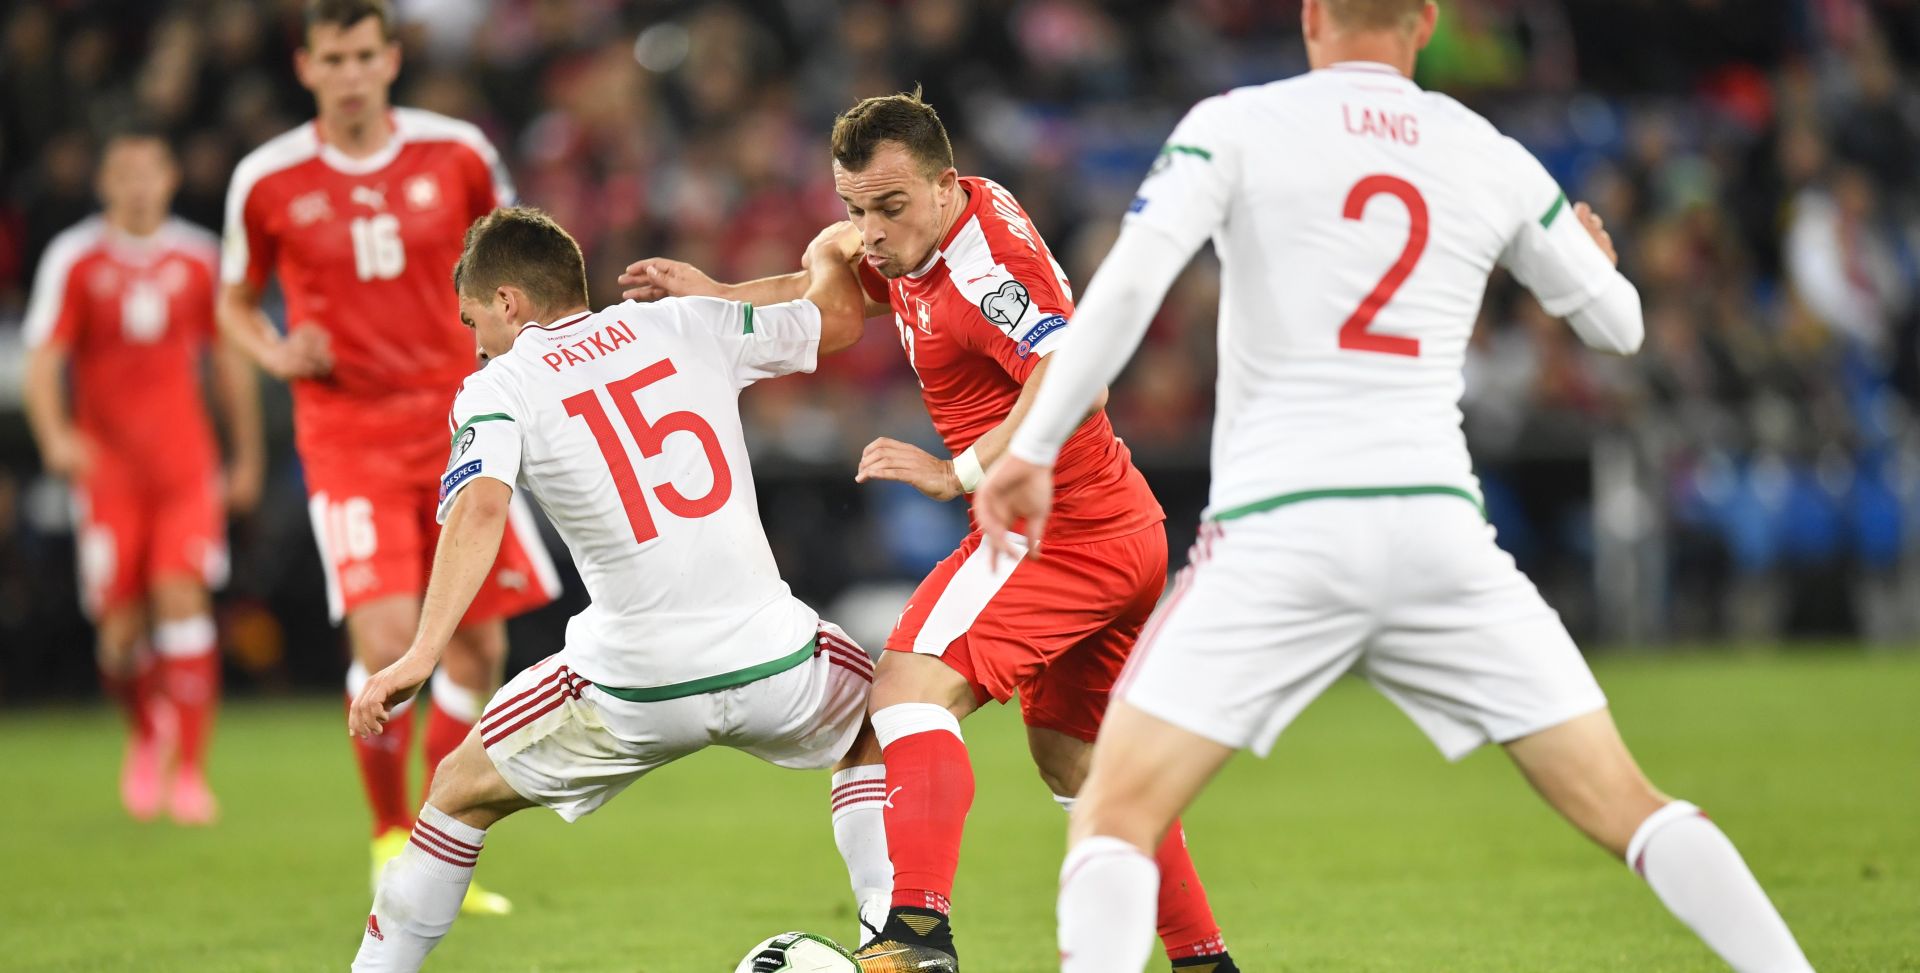 epa06251037 Switzerland's Xherdan Shaqiri (C) fights for the ball with Hungary's Mate Patkai (L) and Adam Lang during the 2018 FIFA World Cup Group B qualification soccer match between Switzerland and Hungary in the St. Jakob-Park stadium in Basel, Switzerland, 07 October 2017.  EPA/GIAN EHRENZELLER